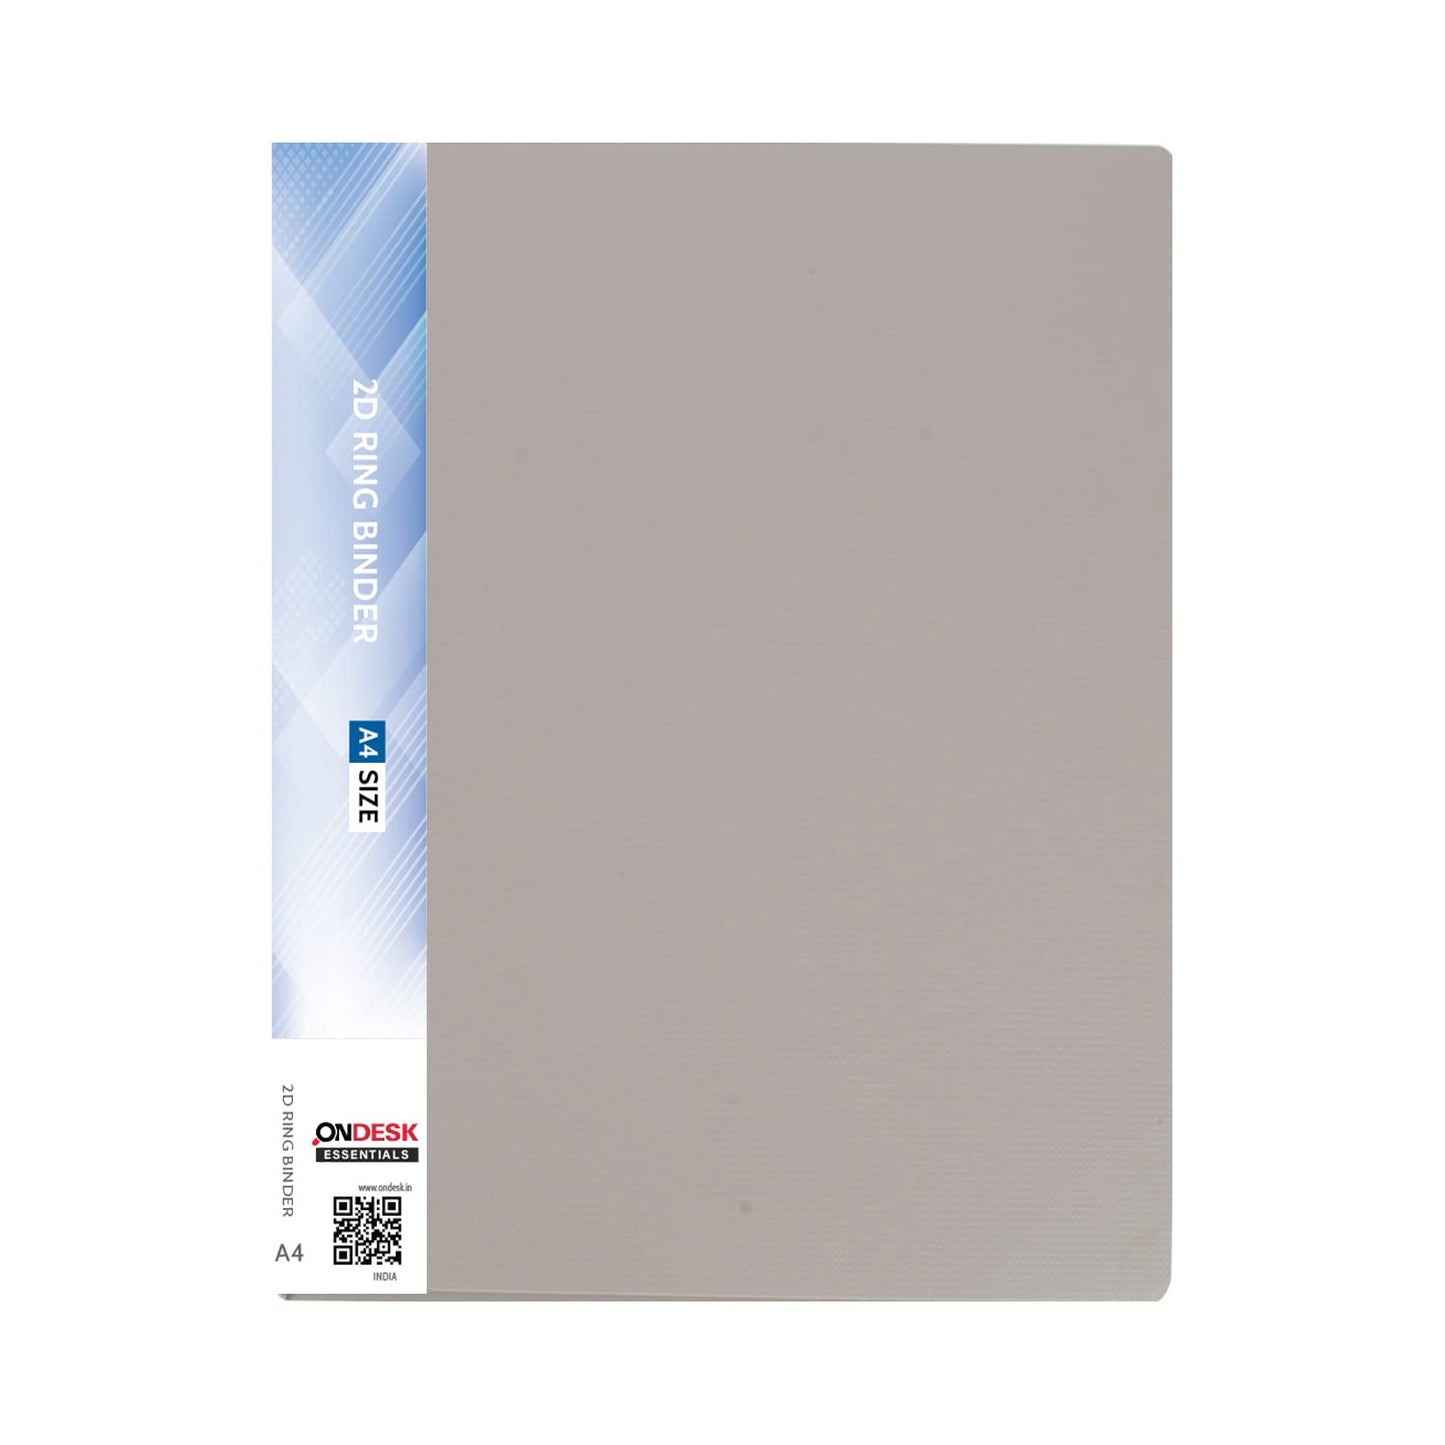 Ondesk Essentials 2D Ring Binder File | Durable Plastic Document File Folder | File For A4 Size Documents | Grey, Pack Of 1